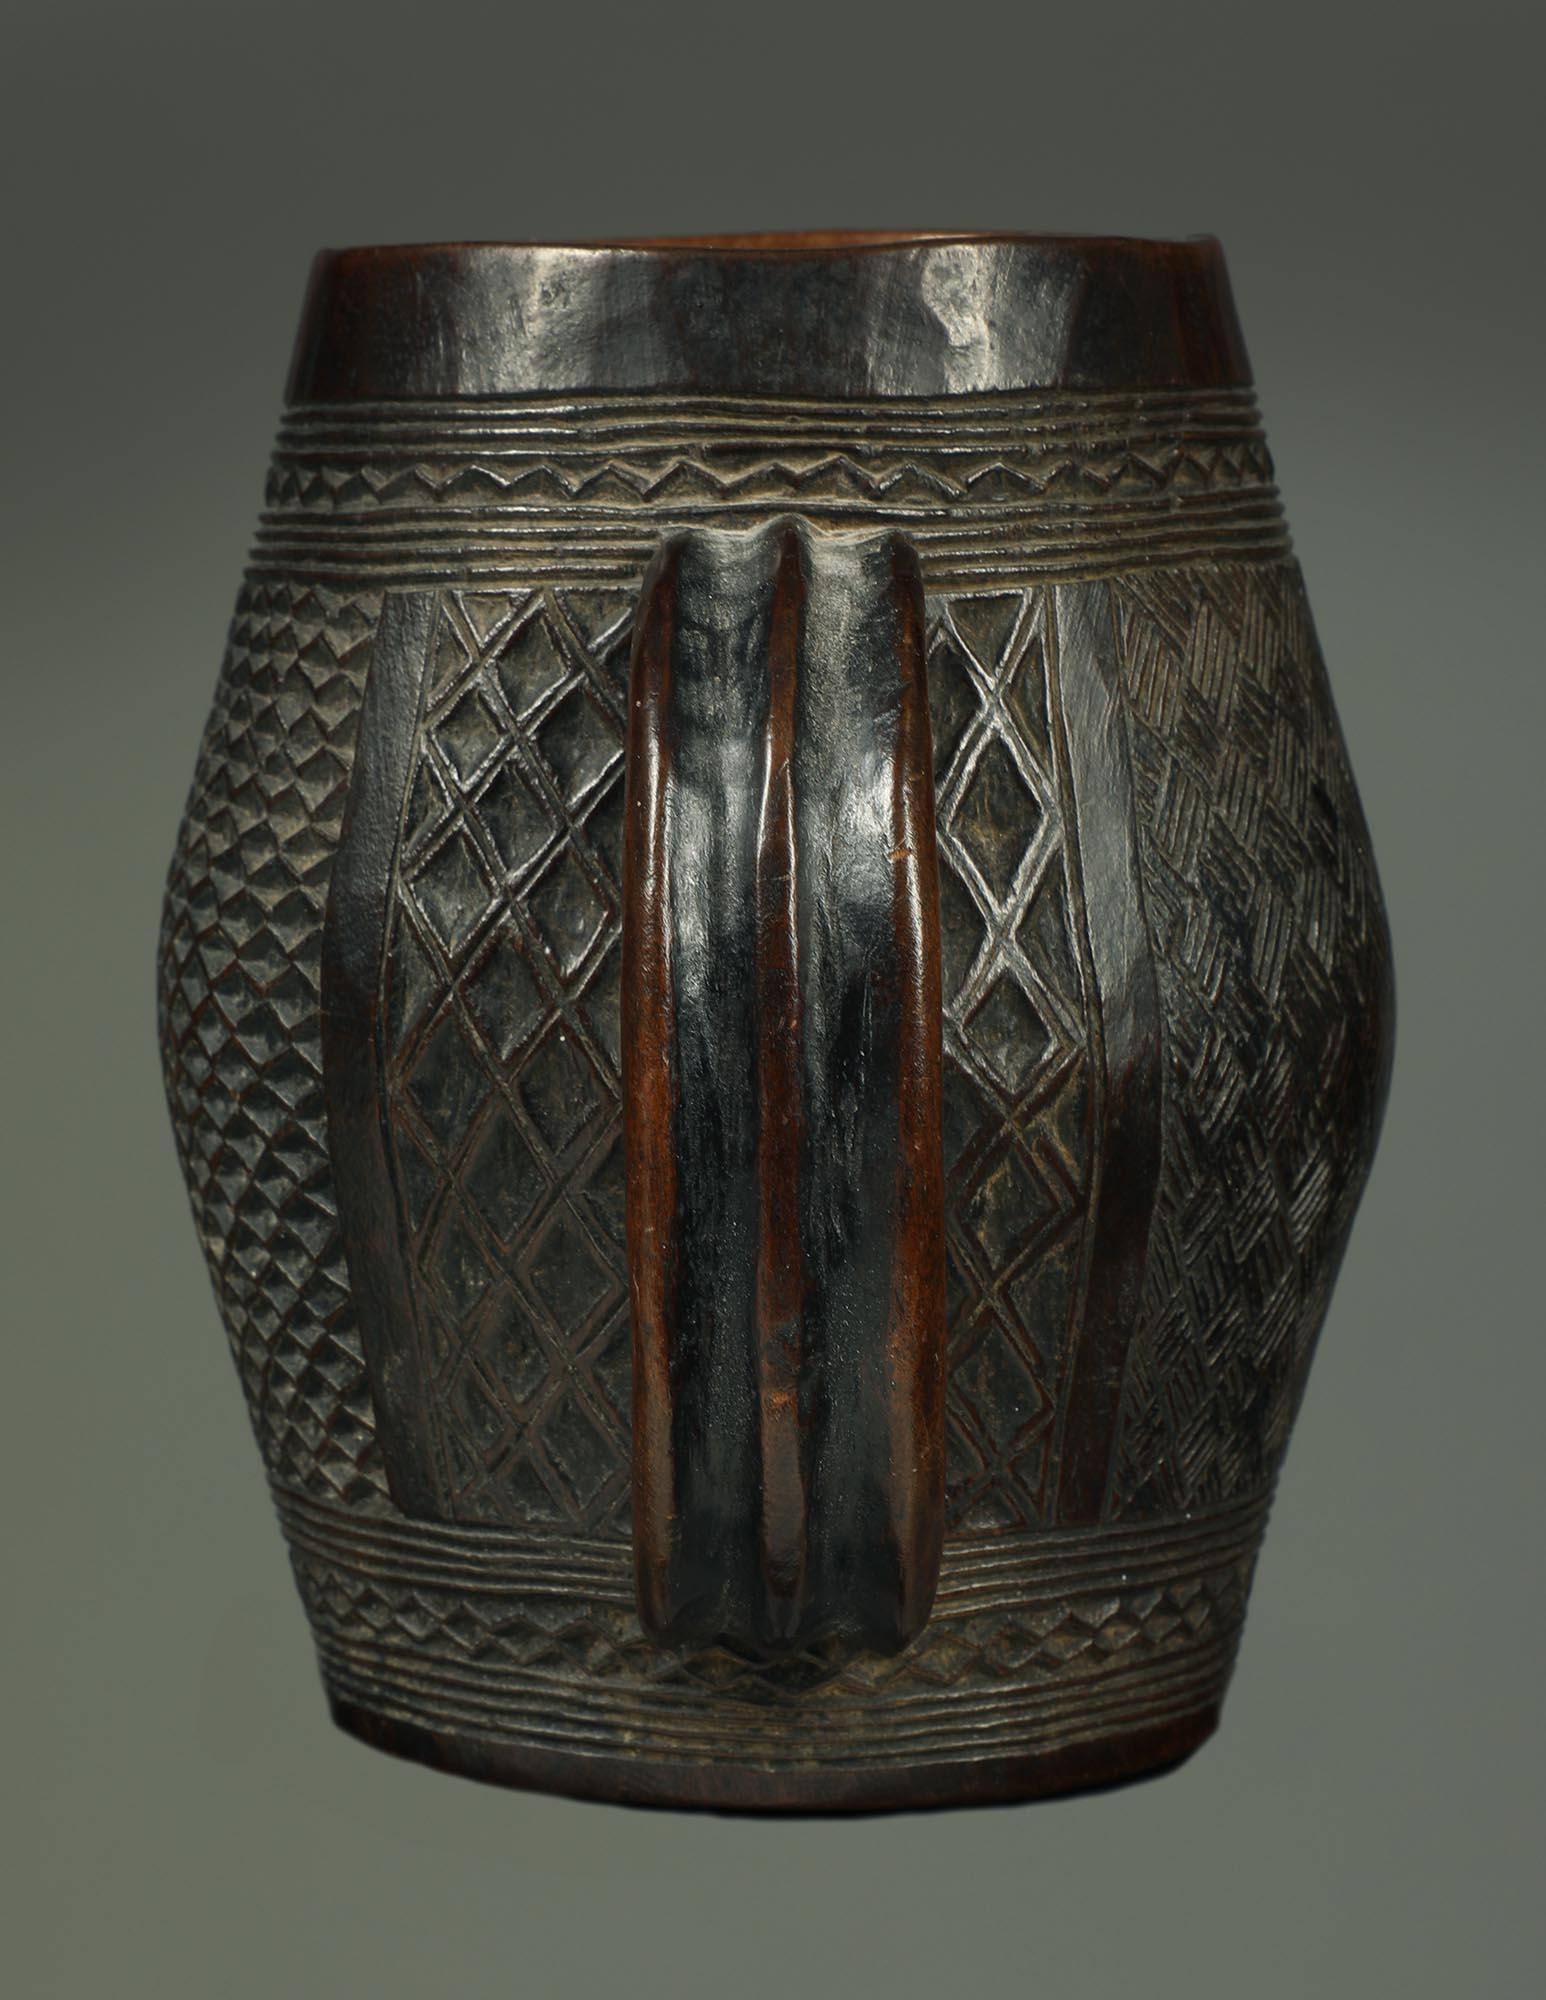 Fine Kuba Cup with Incised Textile Designs, early 20th century Central Africa  For Sale 1